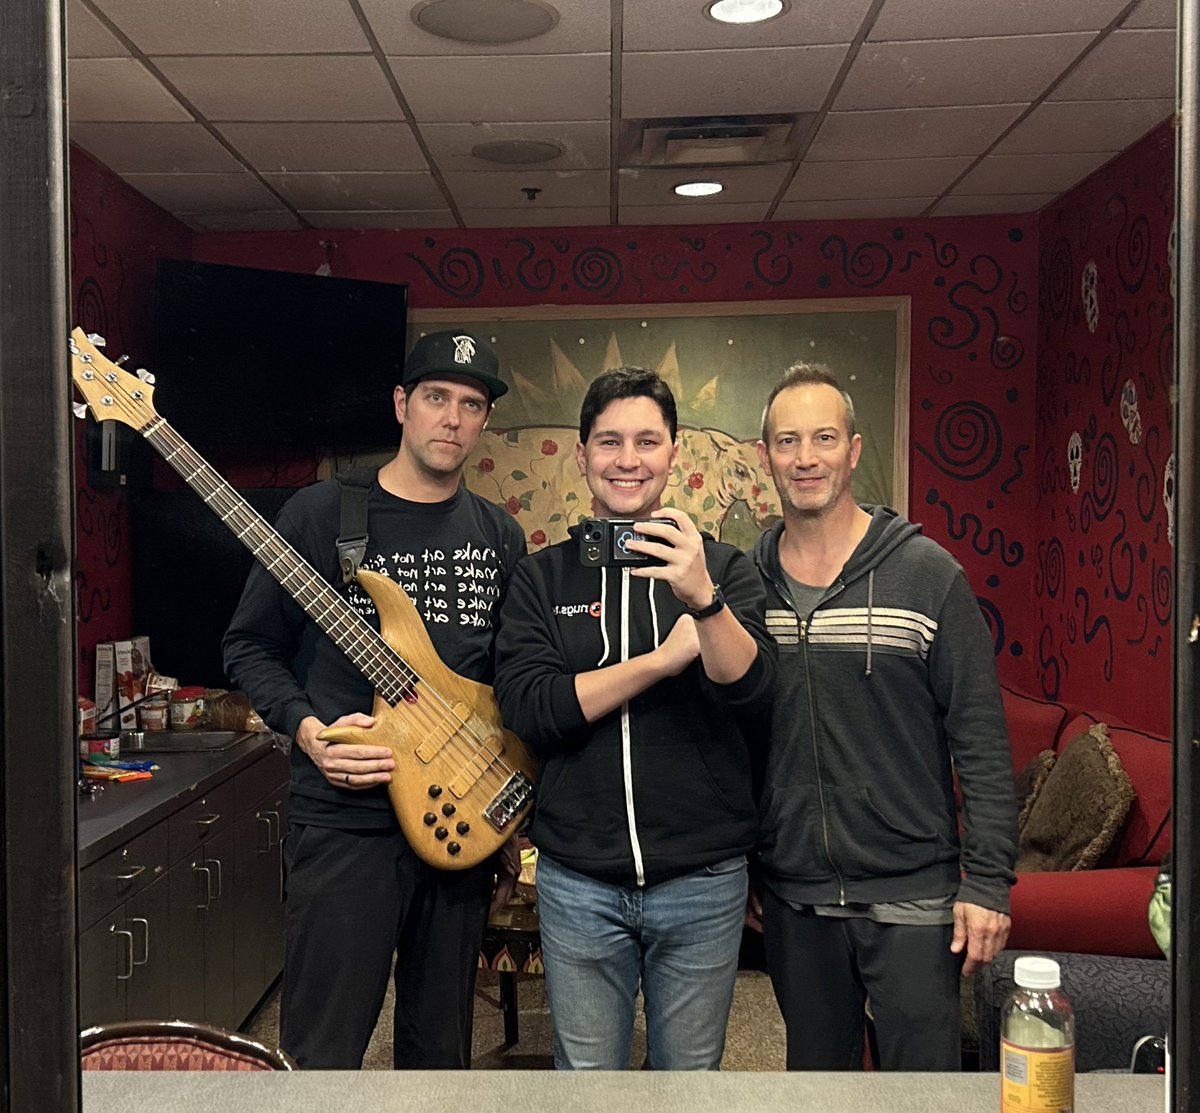 It’s been over 6 months since the last time @goldlikejoel and I recorded a pod, so we had to do one ahead of @umphreysmcgee tonight! Stasik joins in the fun as well as we talk about all the drummers they played with, Kris’ return, and an UMBowl teaser Episode coming next week!